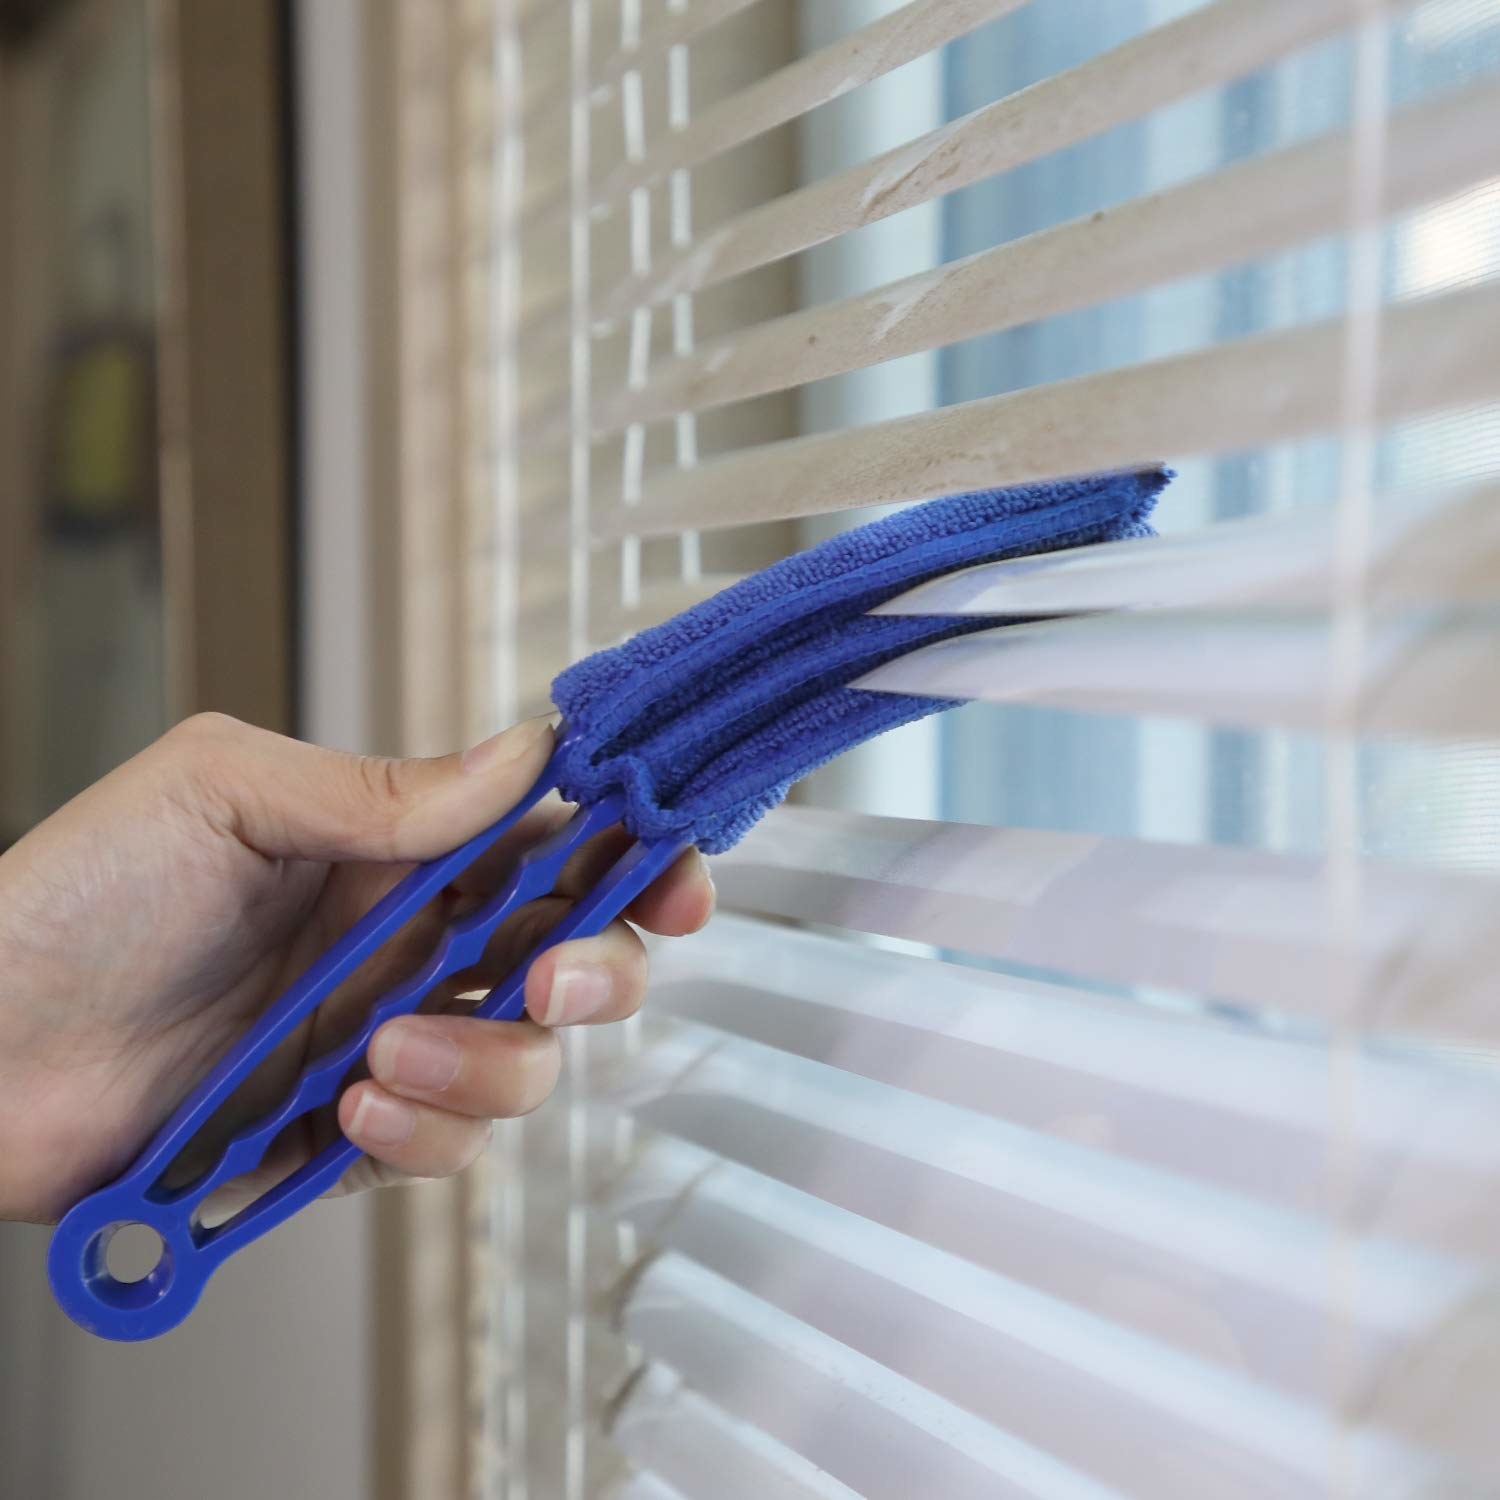 Reviewer cleaning individual blinds with microfiber cloths held together with a plastic handle 